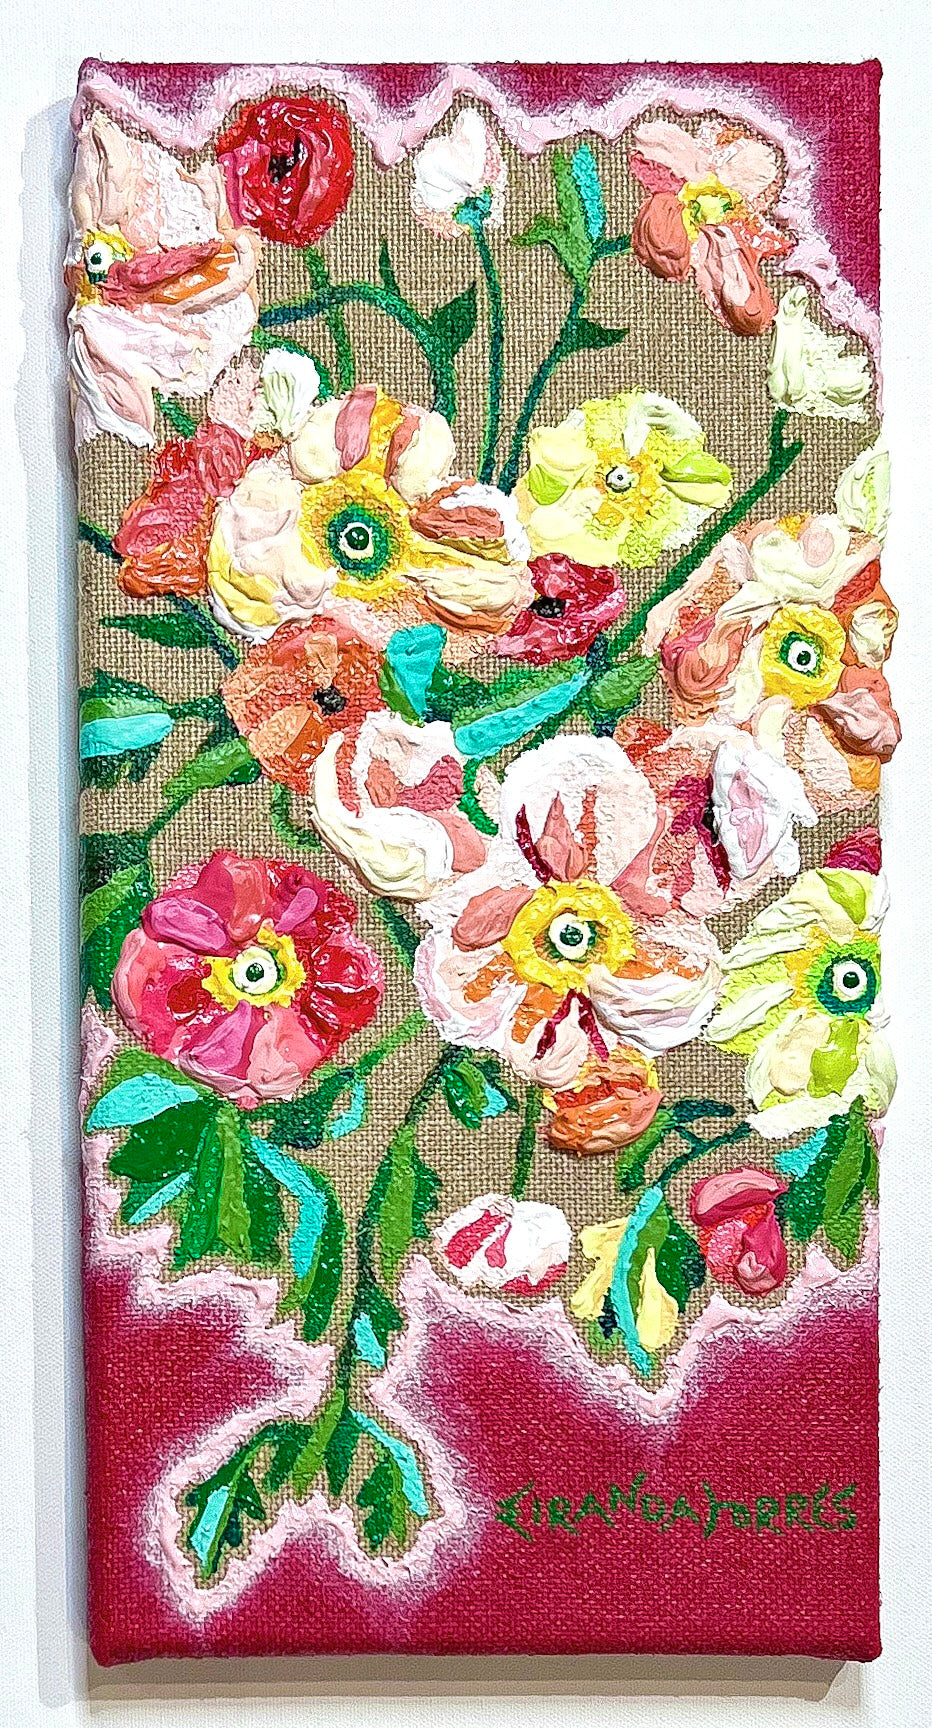 3-Dimensional, Textured Floral Acrylic and Molding Paste Painting, “Wa –  MIRPANDA WORKS